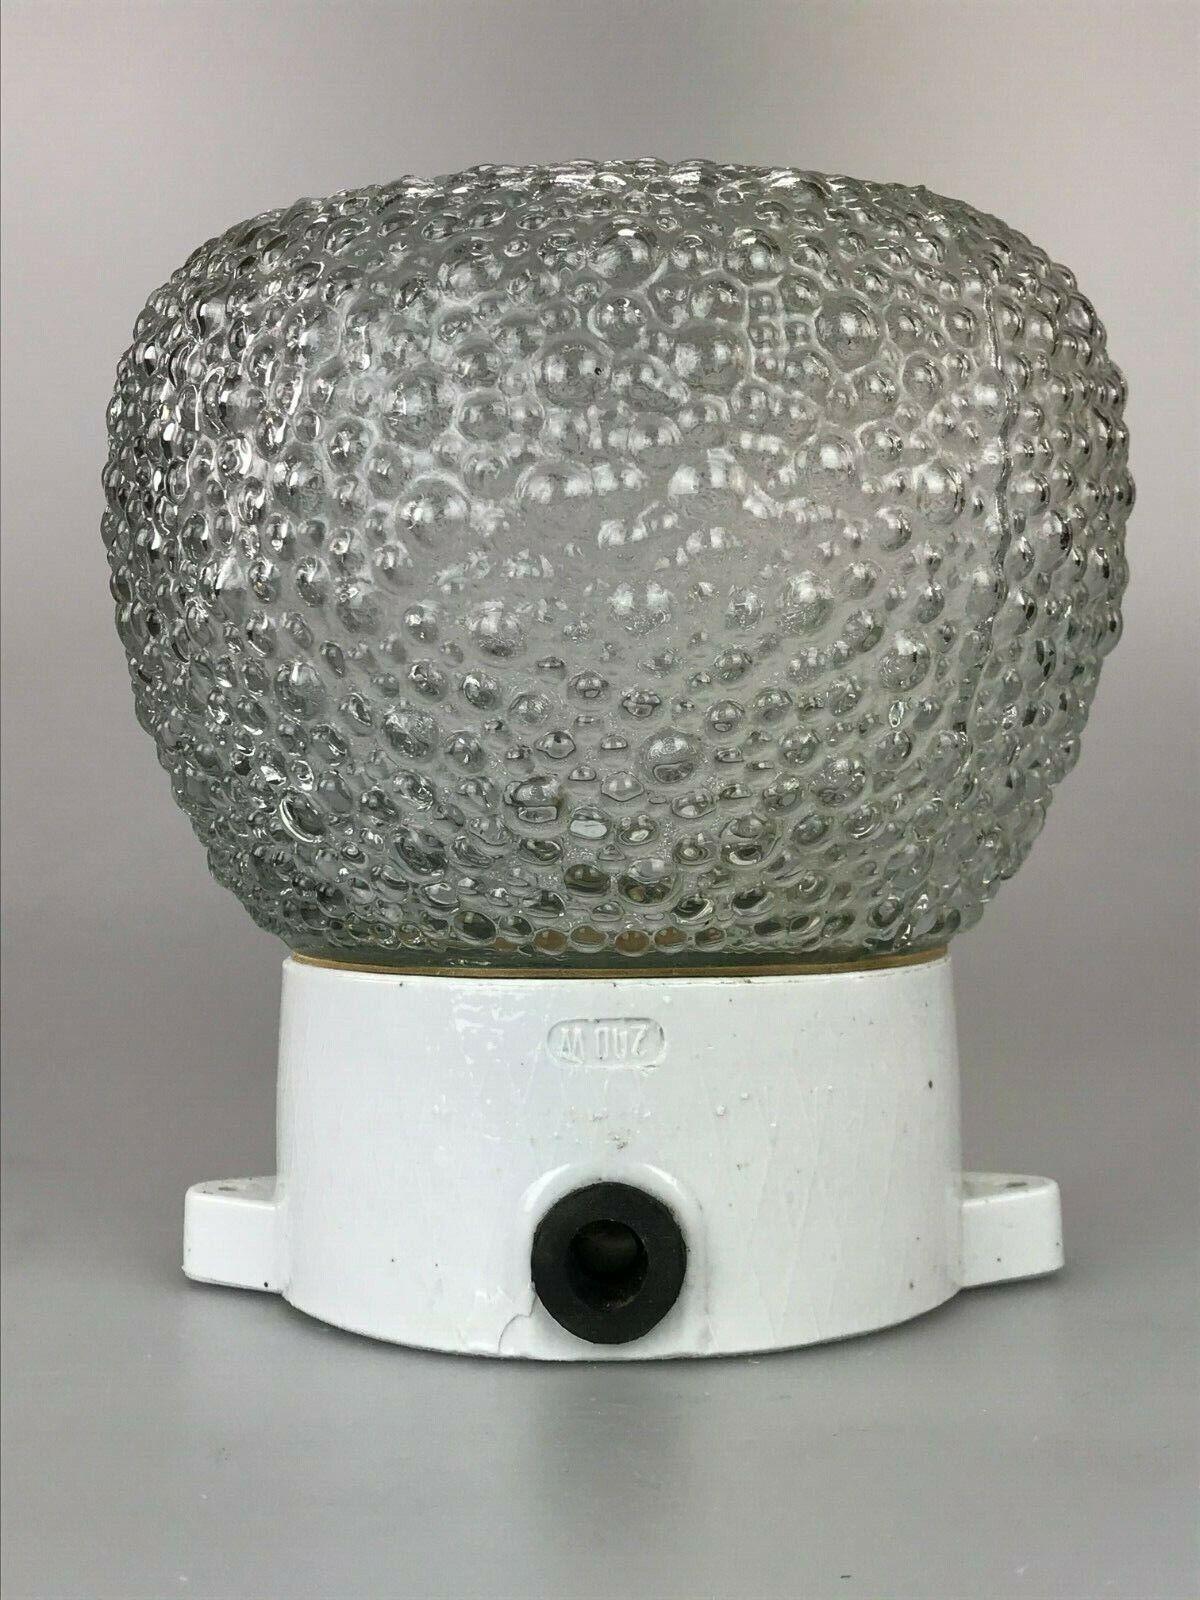 50s 60s lamp light wall lamp cellar lamp ceramic glass design 50s 60s

Object: lamp

Manufacturer:

Condition: good

Age: around 1960-1970

Dimensions:

Diameter = 20cm
Height = 21.5cm

Other notes:

The pictures serve as part of